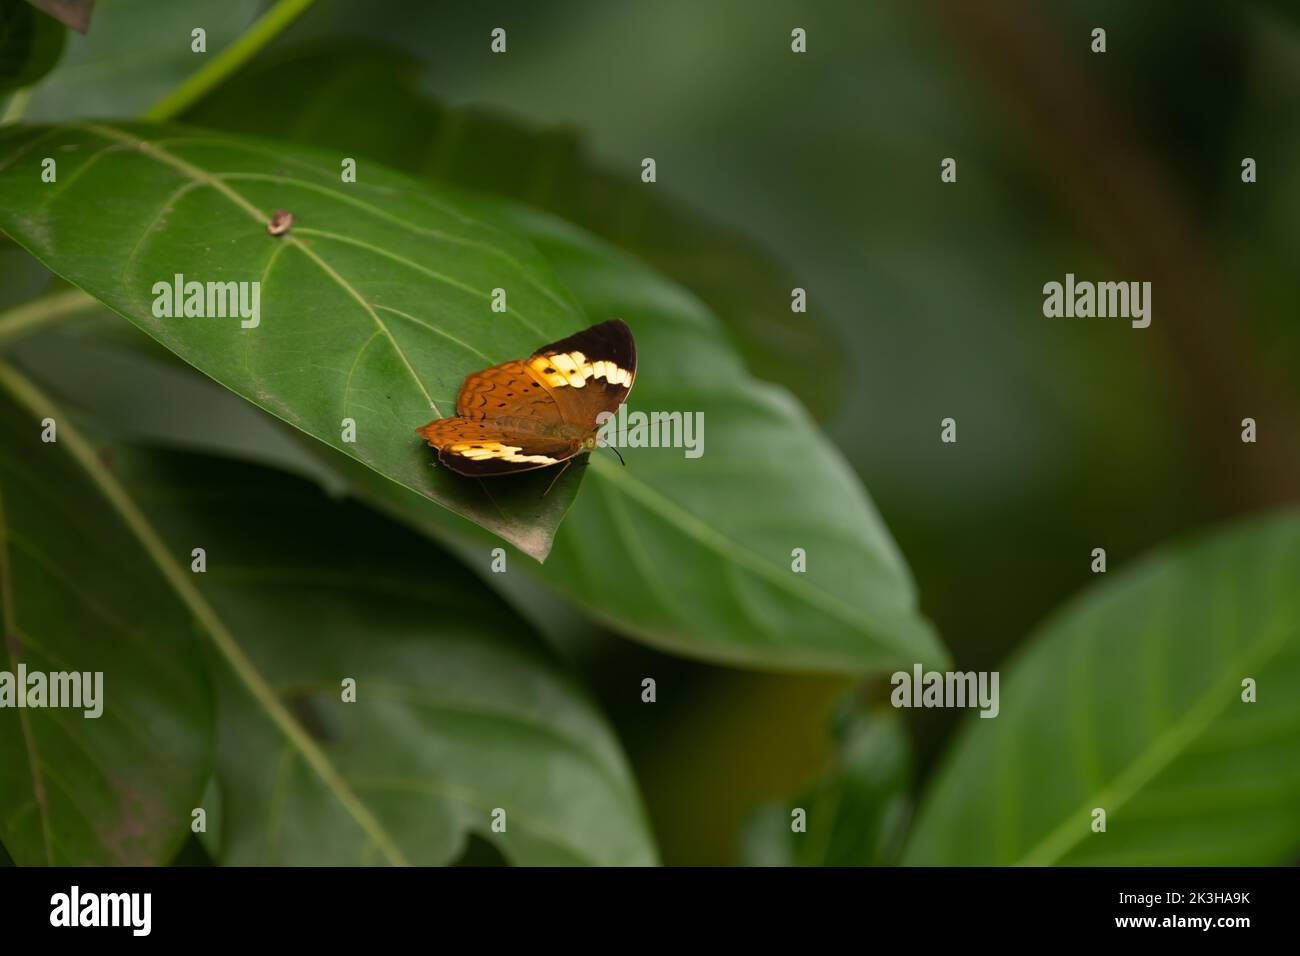 A Rustic (Cupha erymanthis) butterfly resting on a leaf in the garden in Mangalore, India. Brown tropical insect with it's wings spread open. Stock Photo